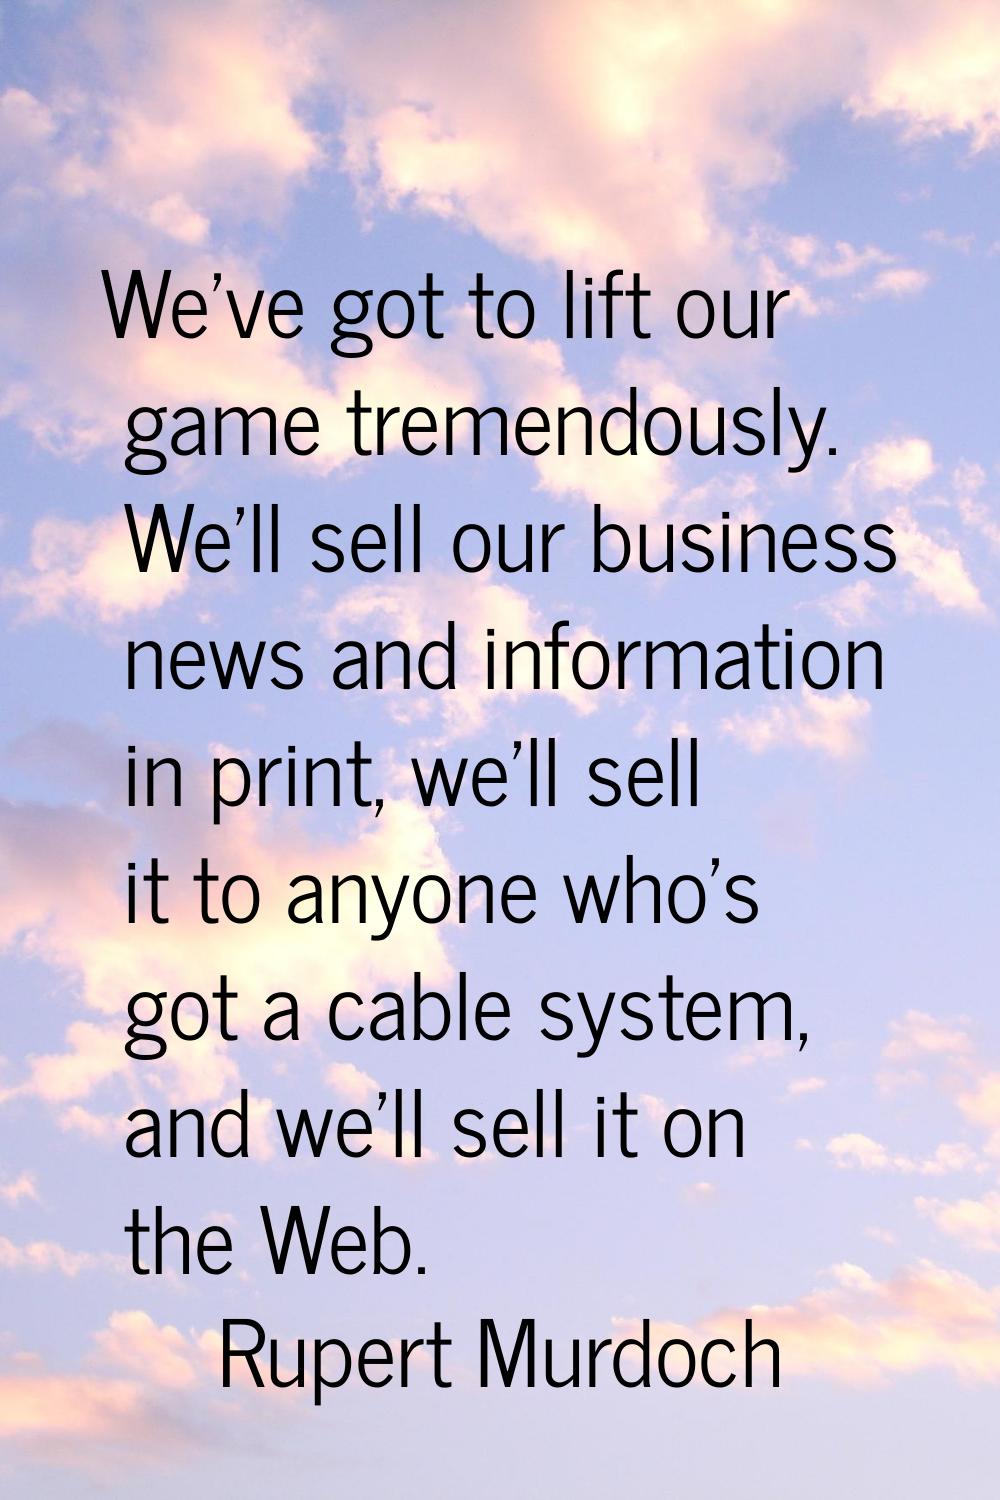 We've got to lift our game tremendously. We'll sell our business news and information in print, we'